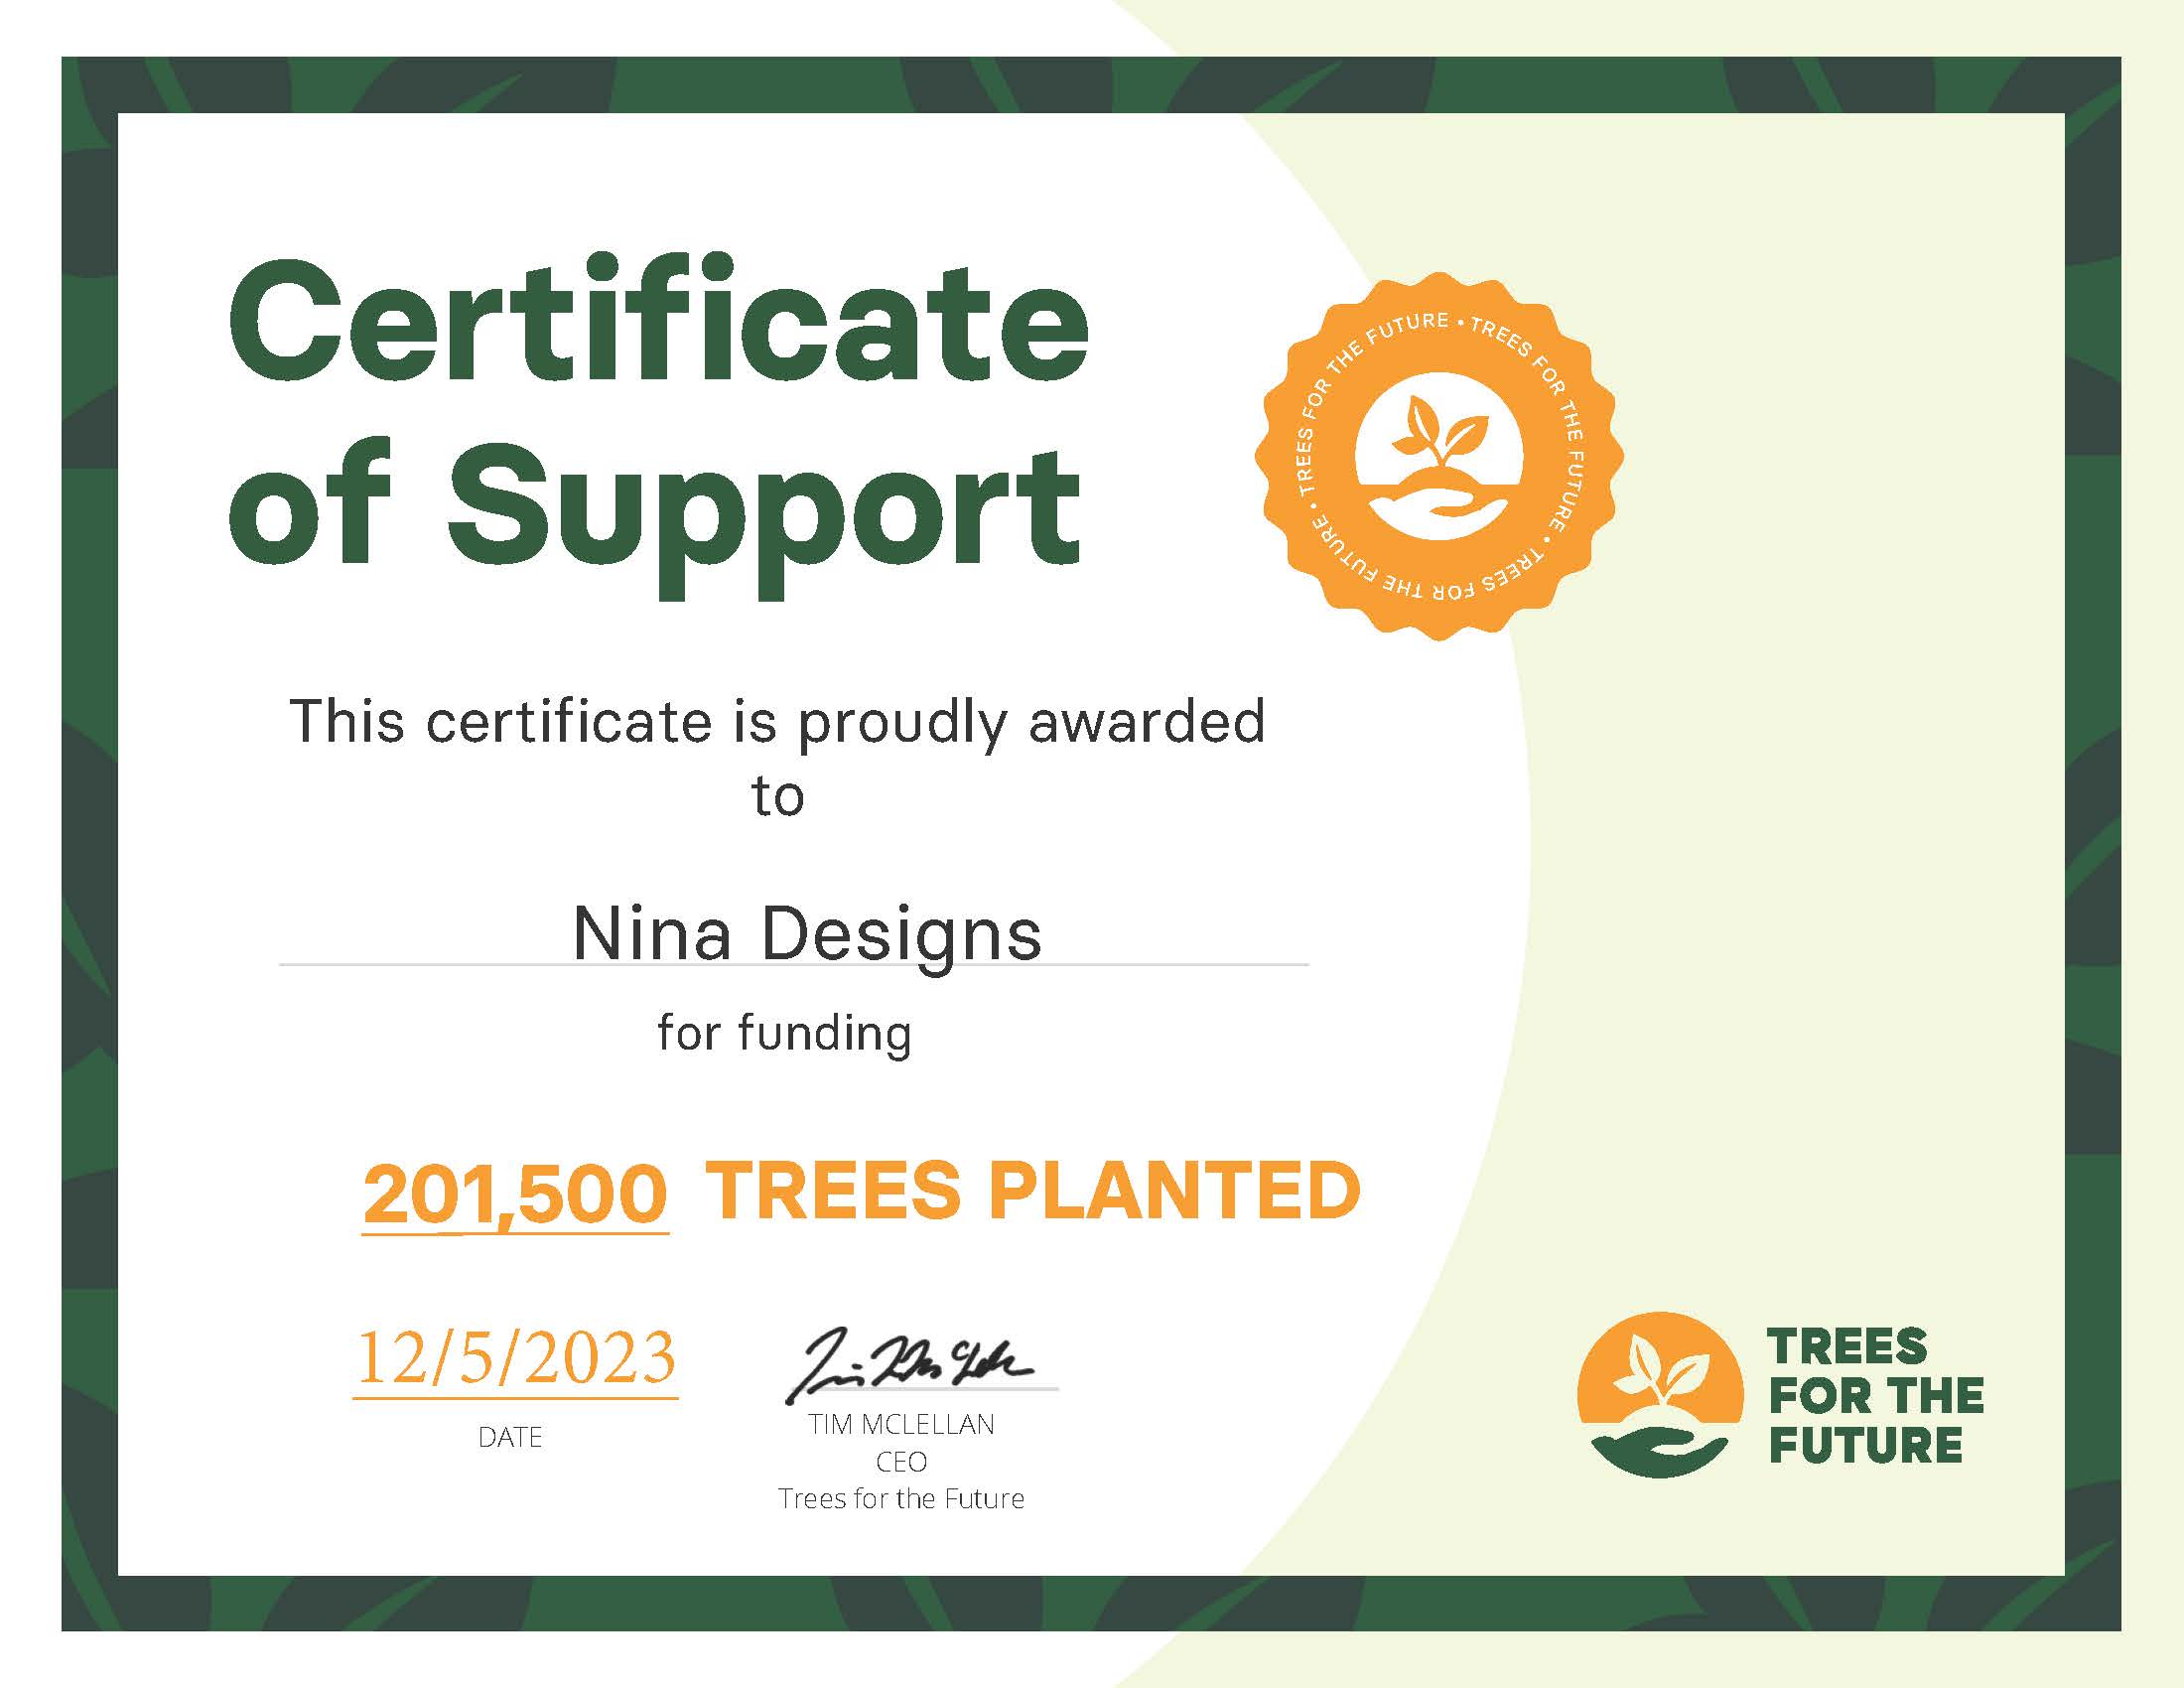 We've planted over 200,000 trees with Trees for the Future!